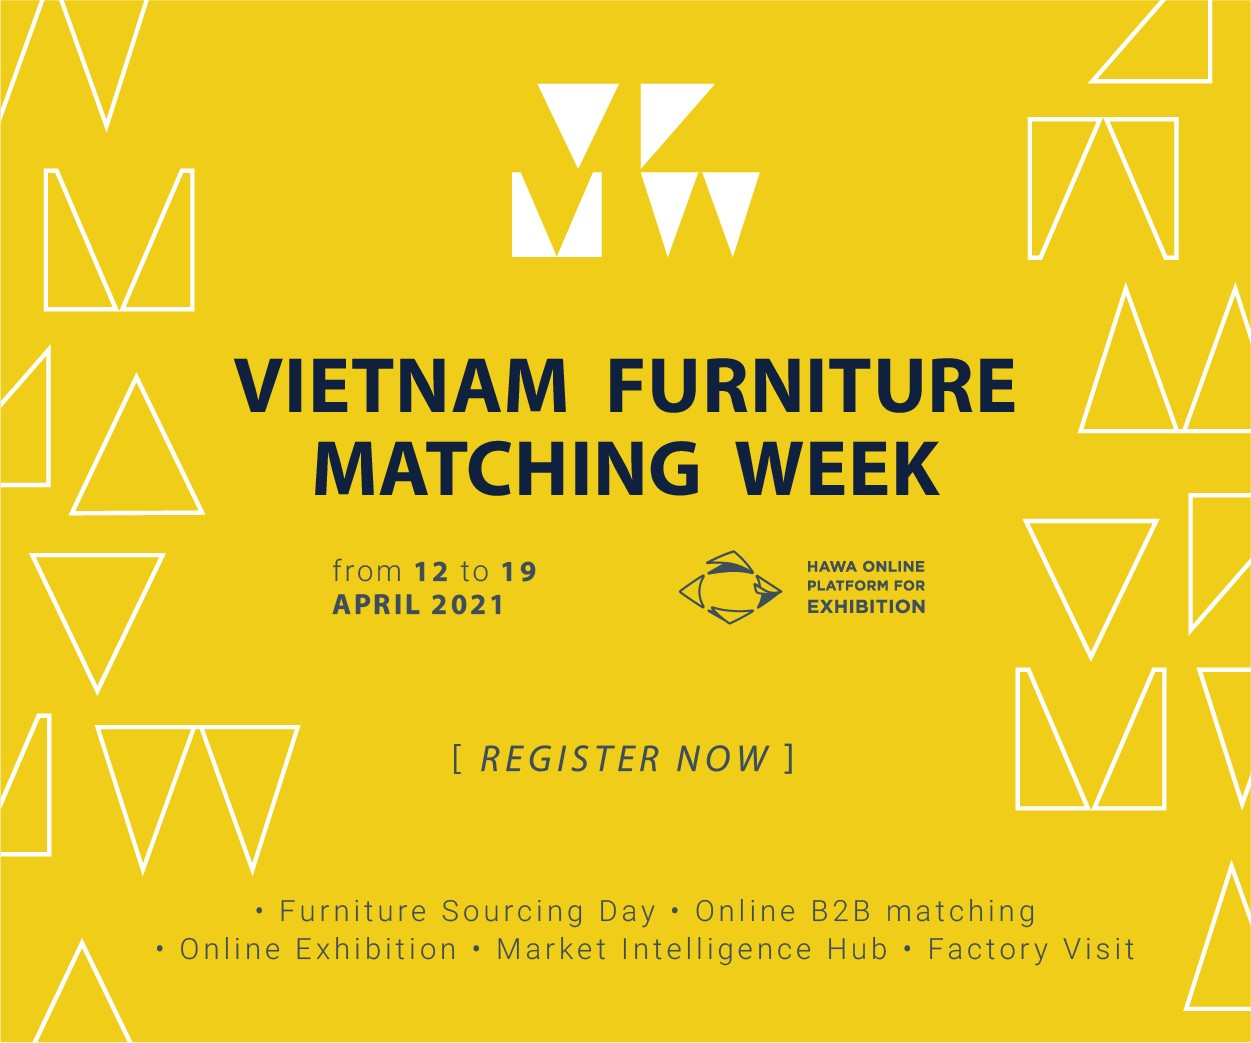 Vietnam Furniture Matching Week 2021 (by HAWA) is coming in April